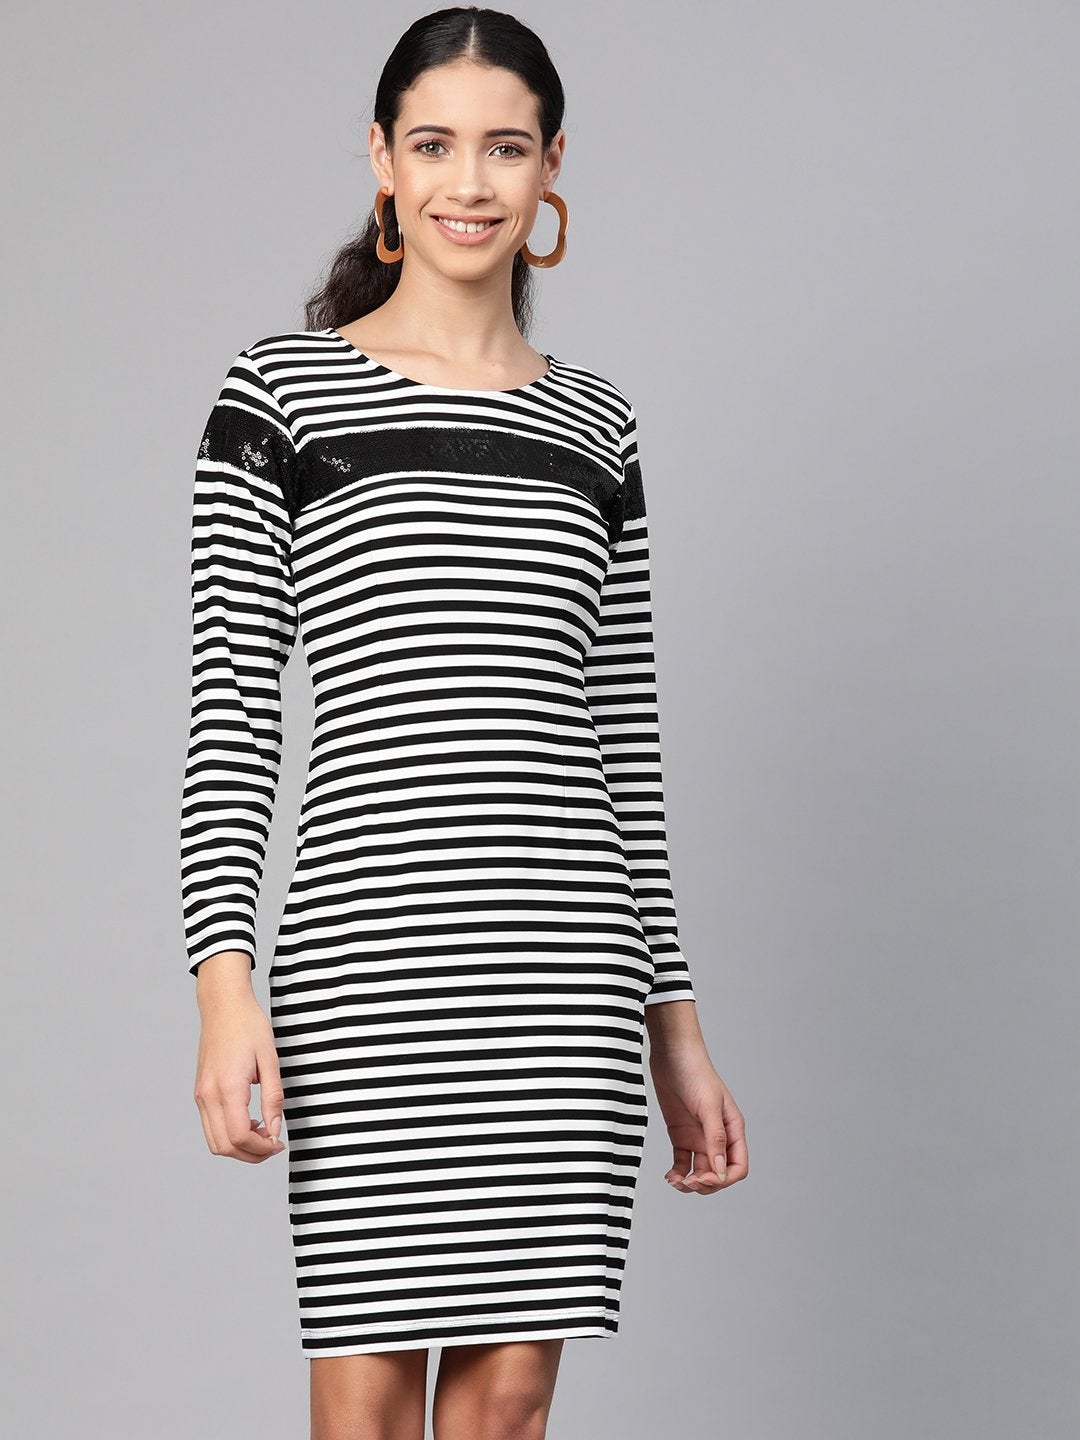 Women's Stripe Dress With Sequin Patch - Pannkh